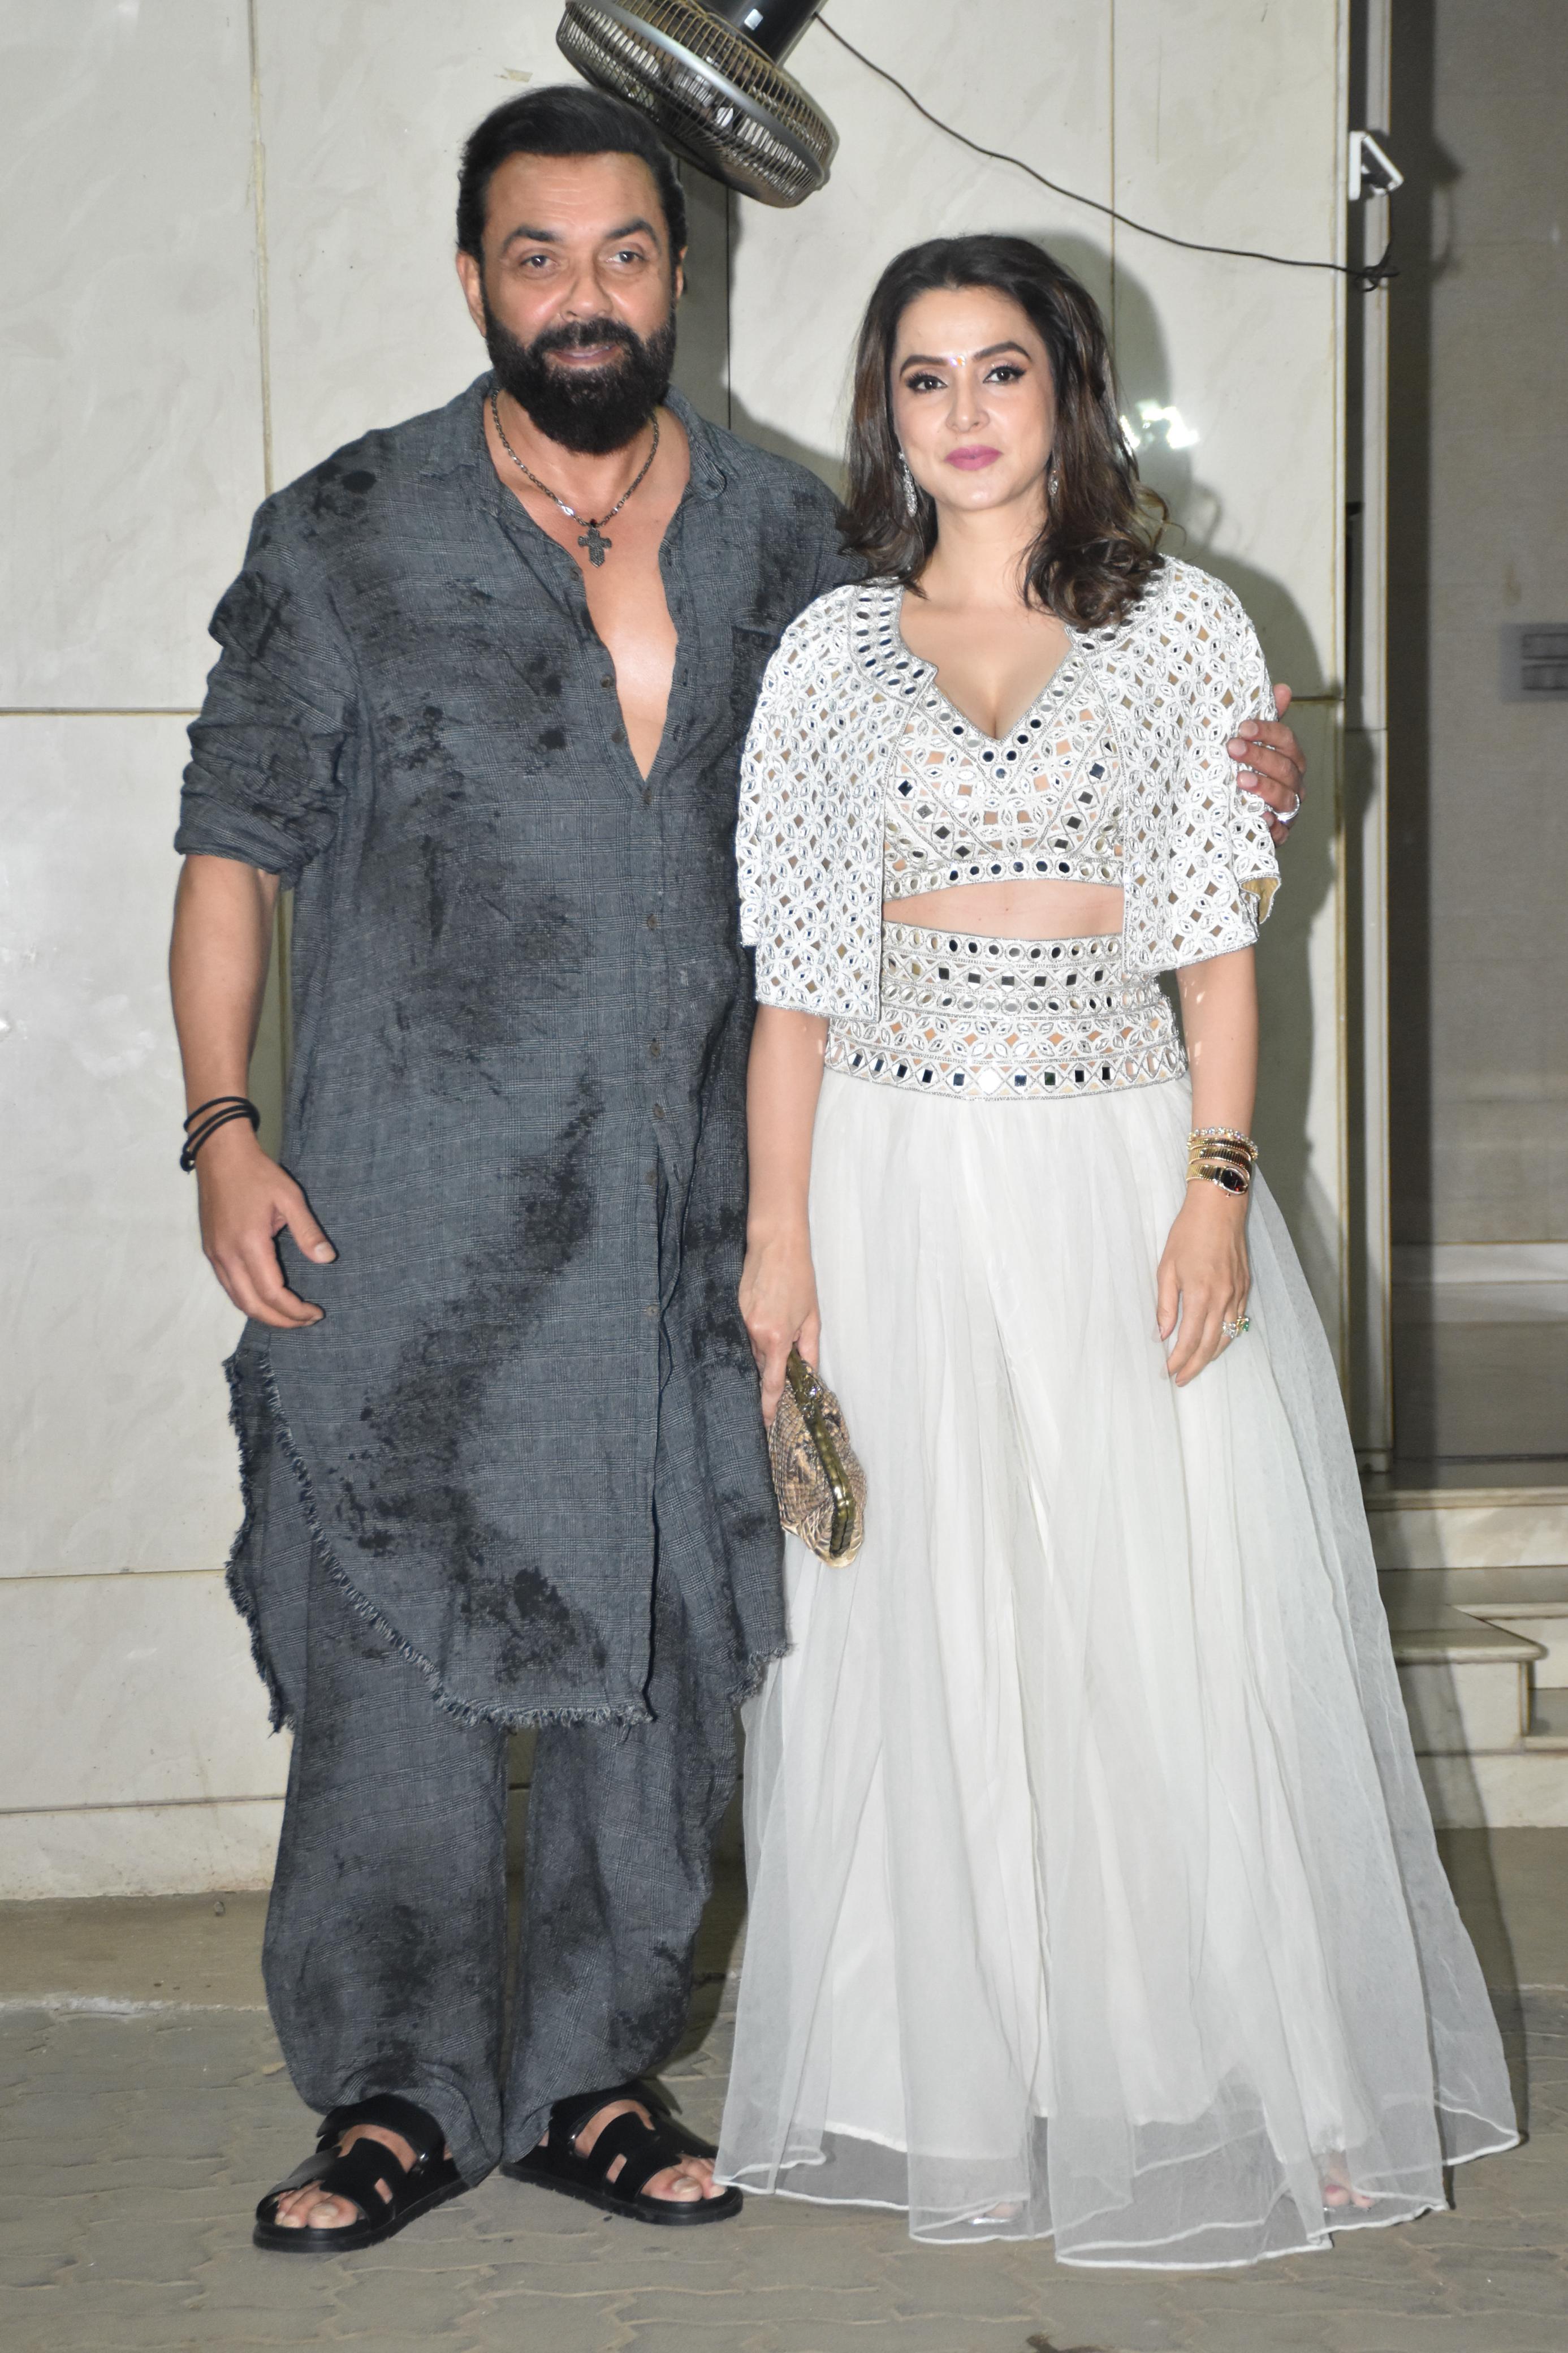 Khan family's close friend Bobby Deol was also snapped at Sohail's residence. The actor aced his look in grey pathani while his wife complemented her in white lehenga